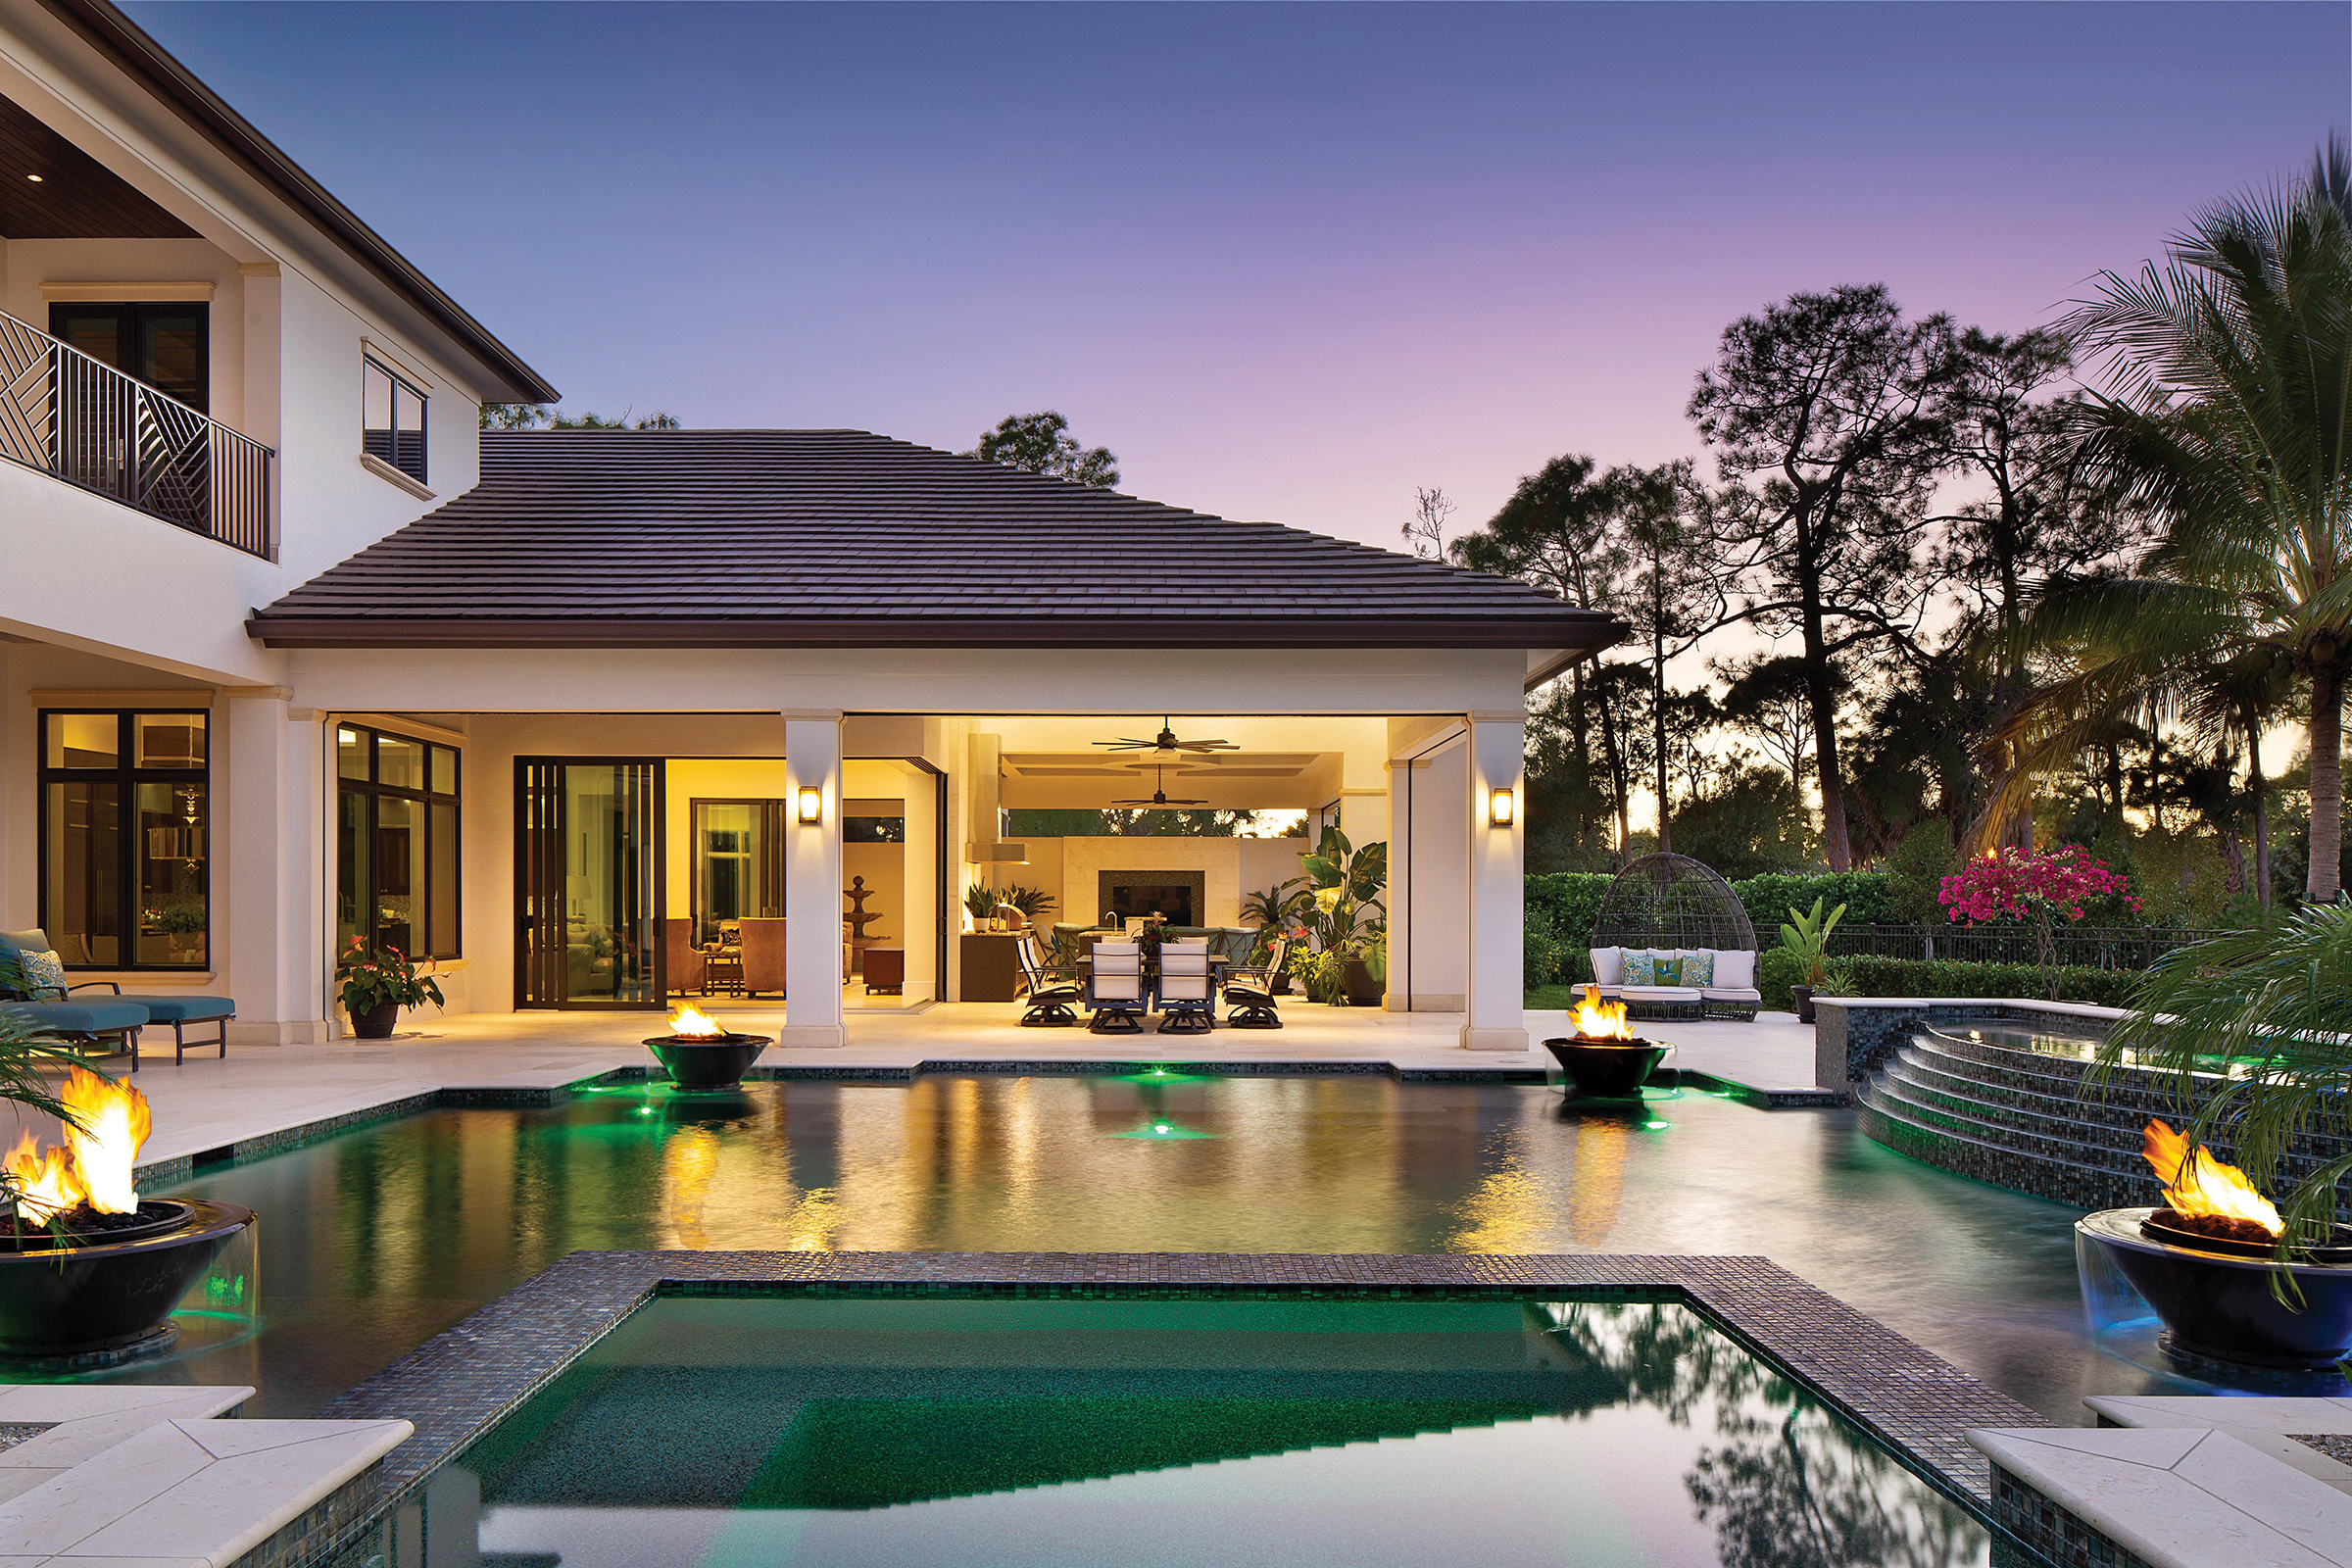  The focal point of the award-winning outdoor living space is the stunning pool with glass tile, four fire bowls, and spa with tiled stair details that features its own waterfall cascade. The pool is heated for year-round swimming and a saltwater sys